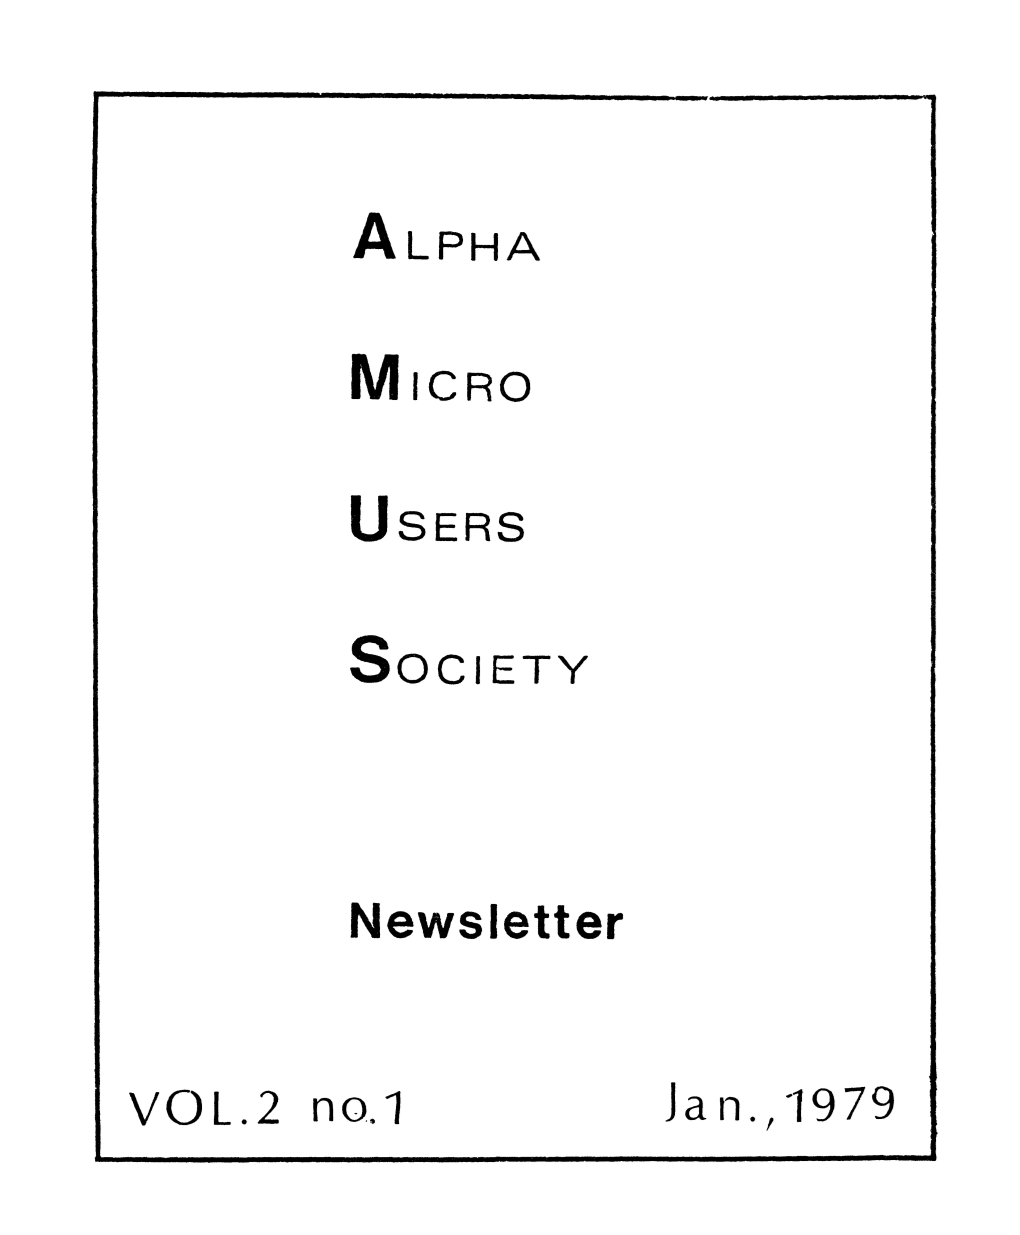 Ja N., '1979 the ALPHA MICRO USERS SOCIETY Is Meant Tc Be a Focal Point for Information About the Alpha Micro Computer